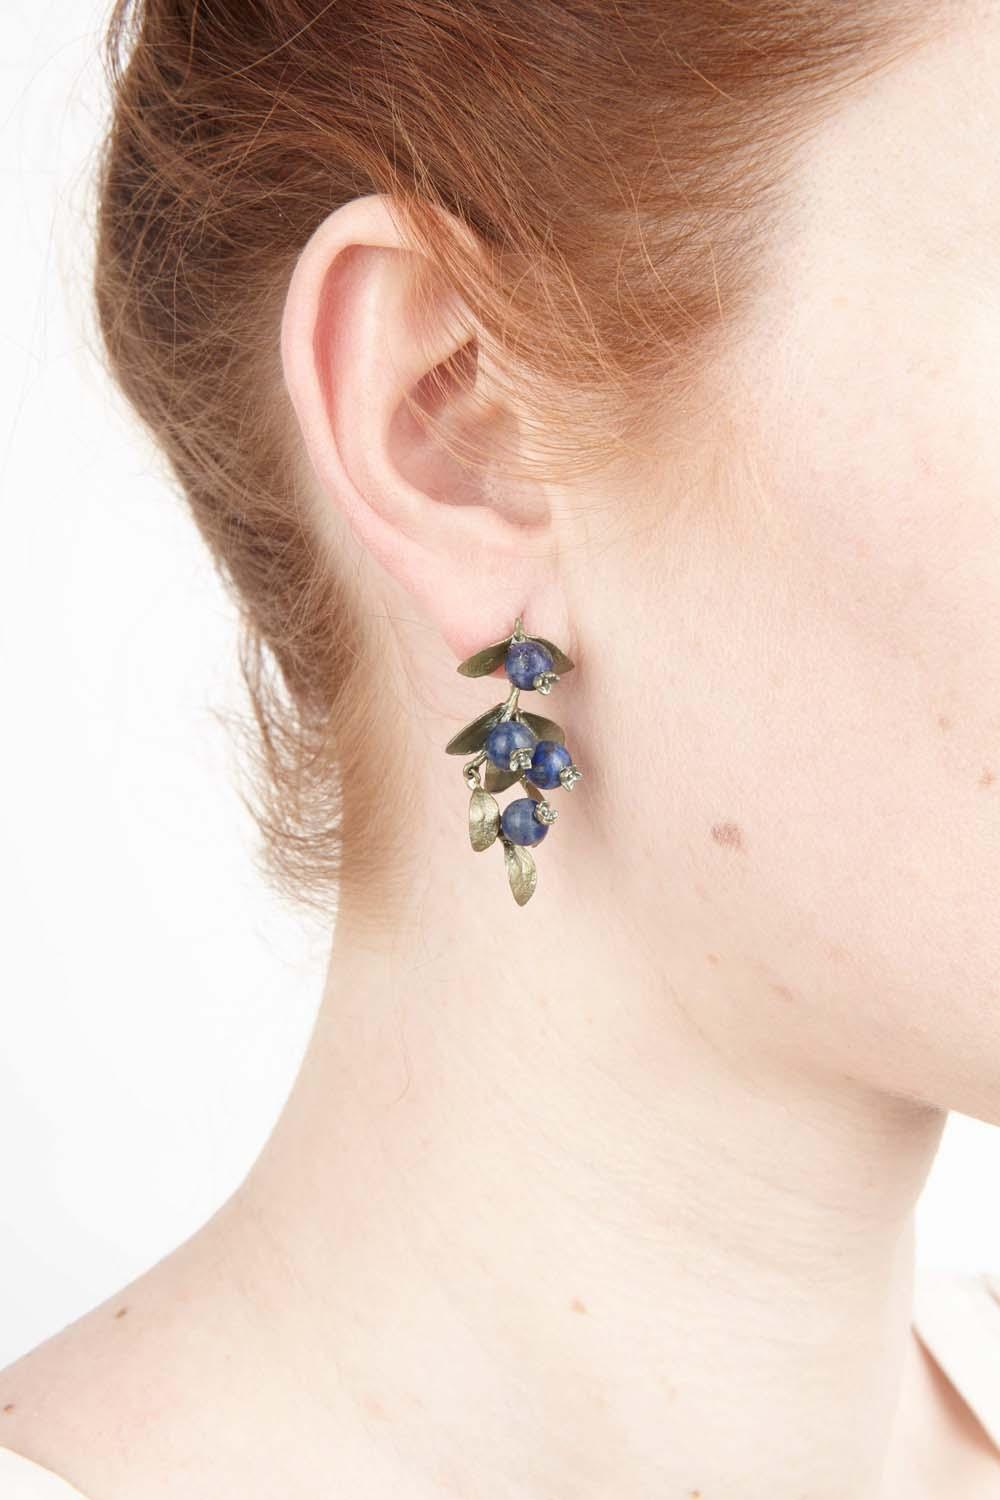 The Blueberry earrings are cast in bronze and accented with dark blue aventurine berries. The posts are 925 silver.